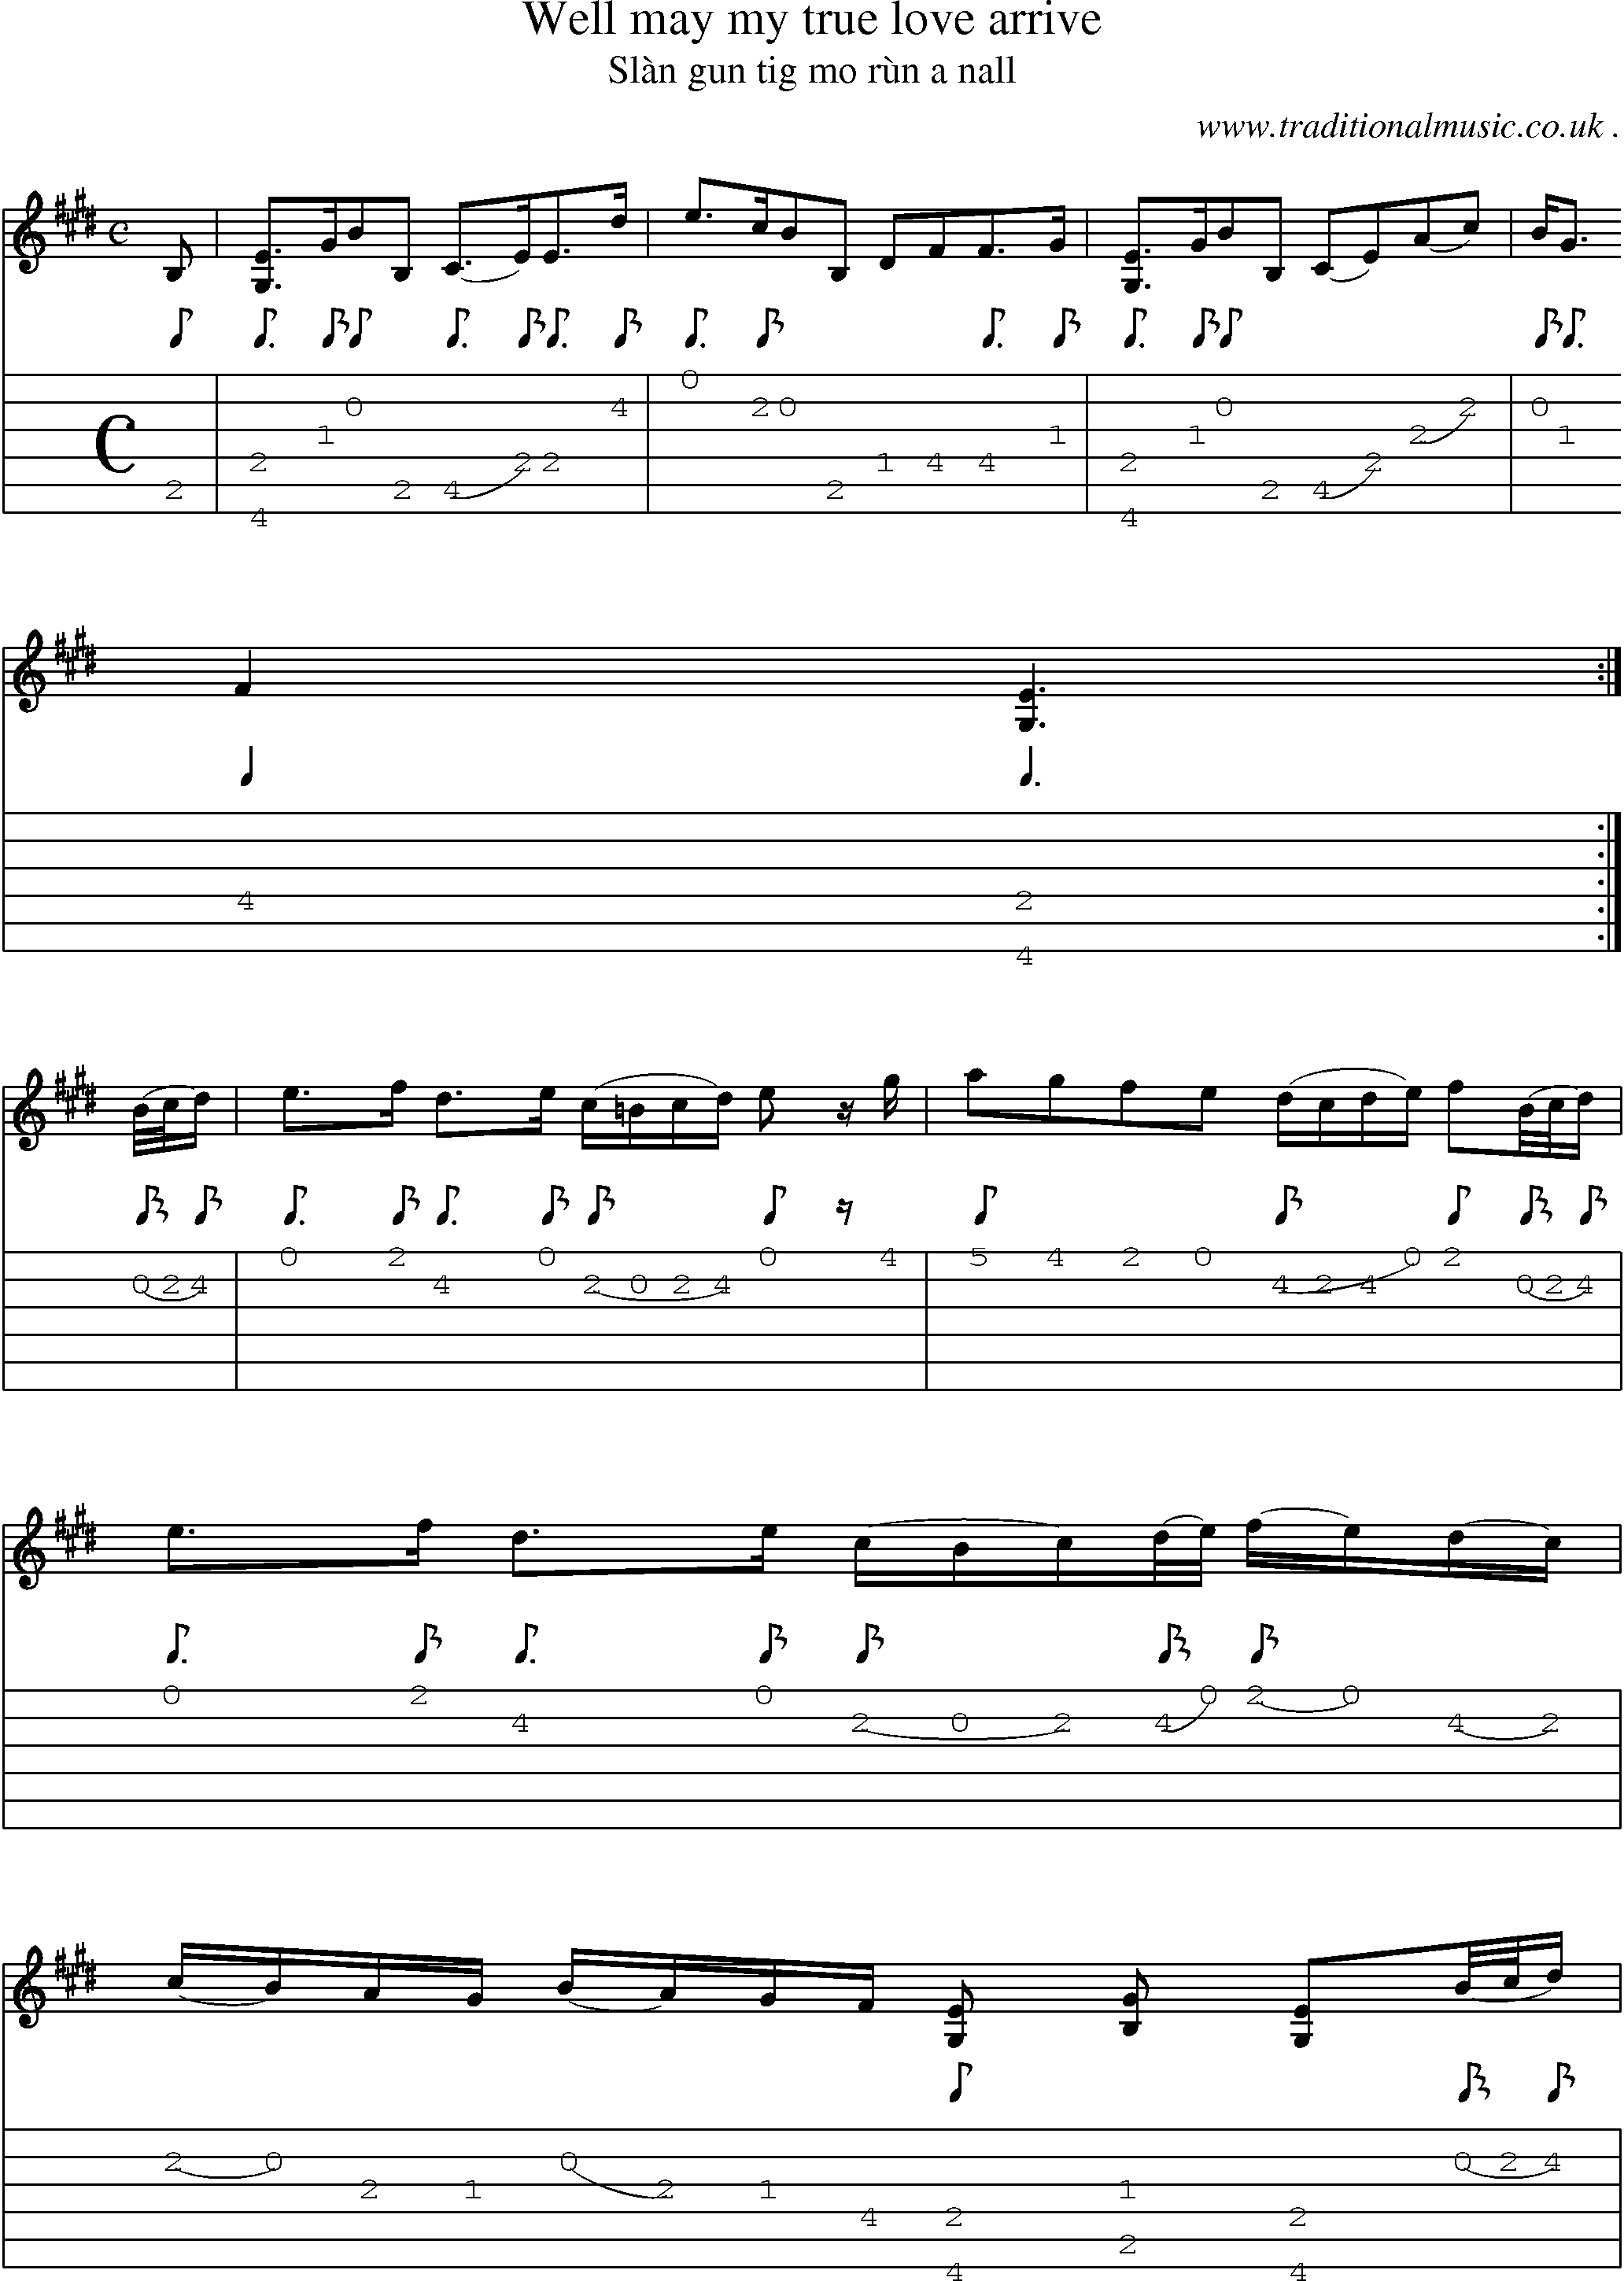 Sheet-music  score, Chords and Guitar Tabs for Well May My True Love Arrive